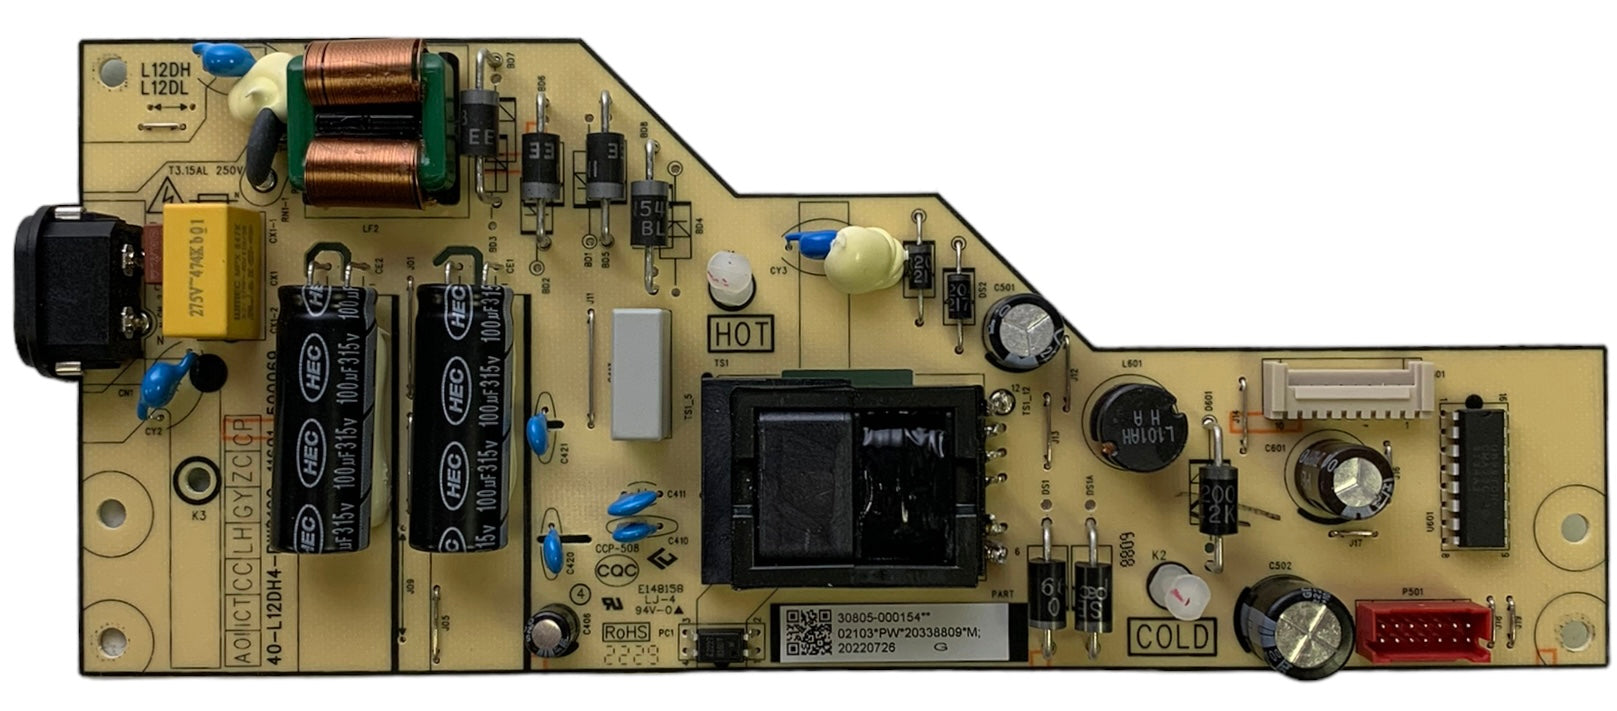 TCL 30805-000154 Power Supply Board